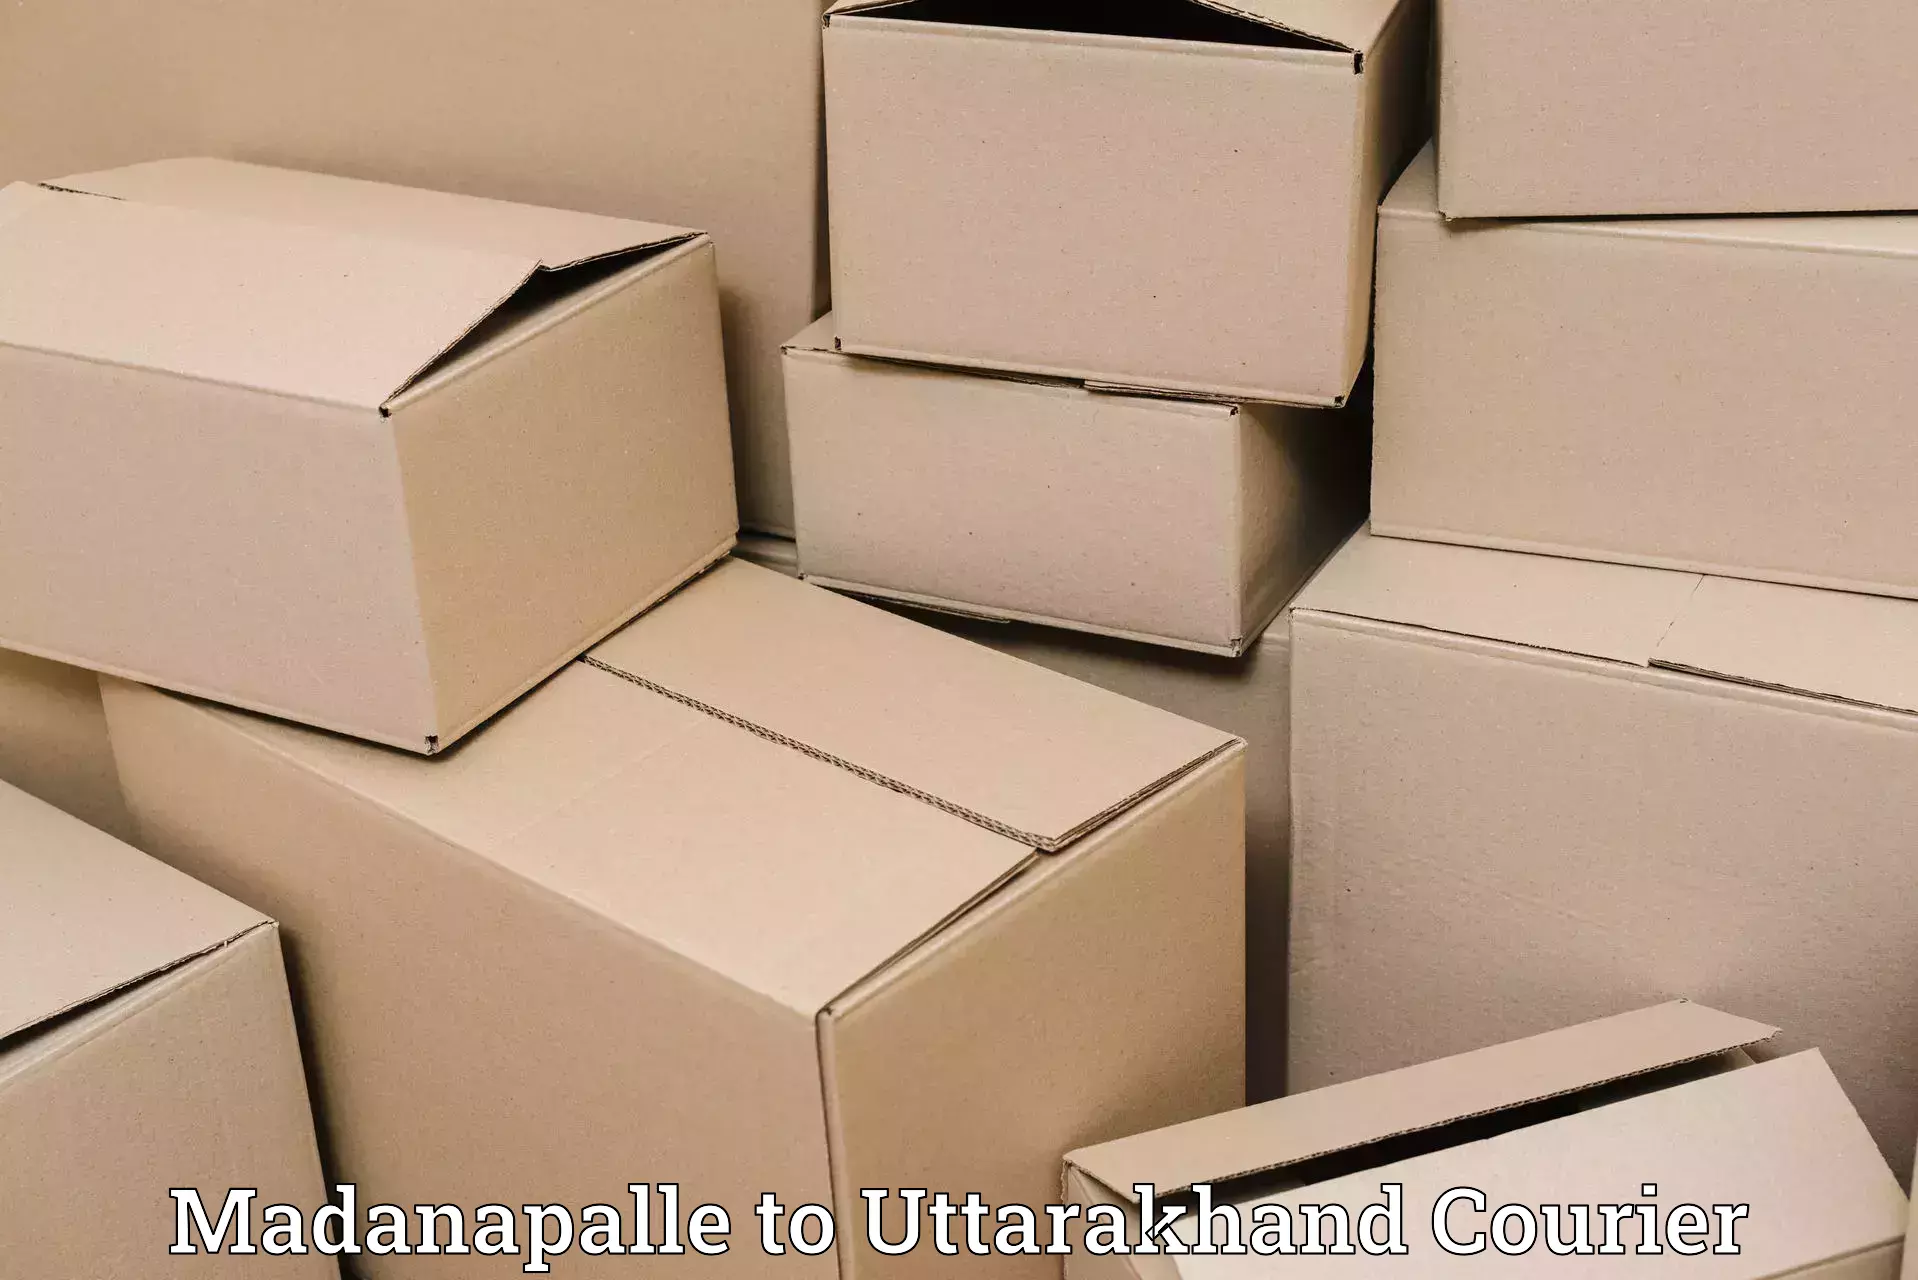 Flexible delivery schedules Madanapalle to Uttarakhand